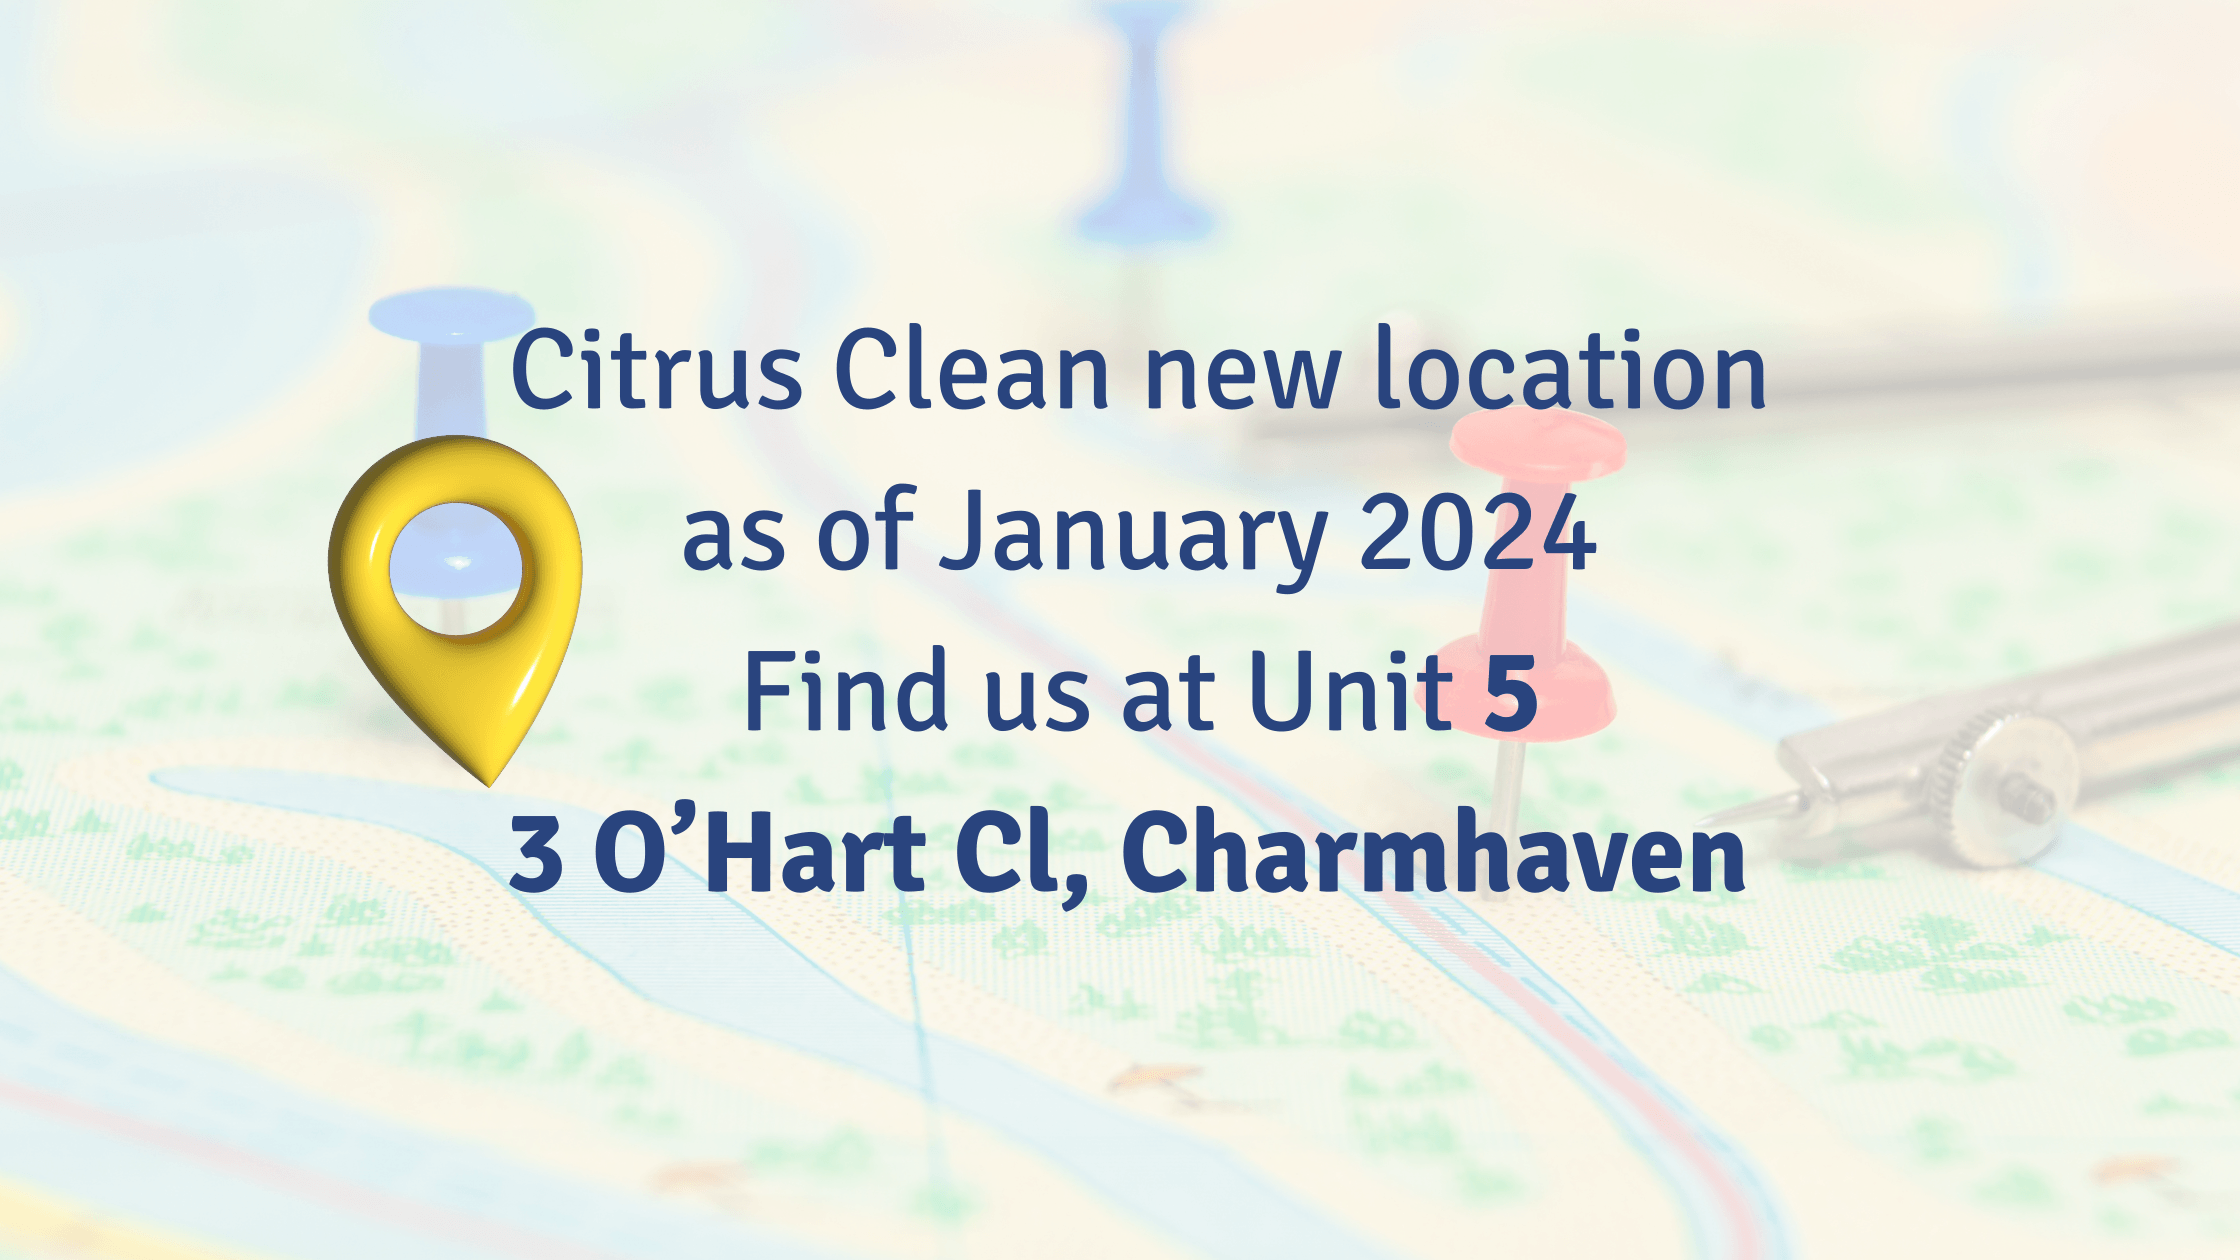 Jan 2024! Citrus Clean HQ has moved to bigger and better premises in Charmhaven. 3 O'Hart Close. 1